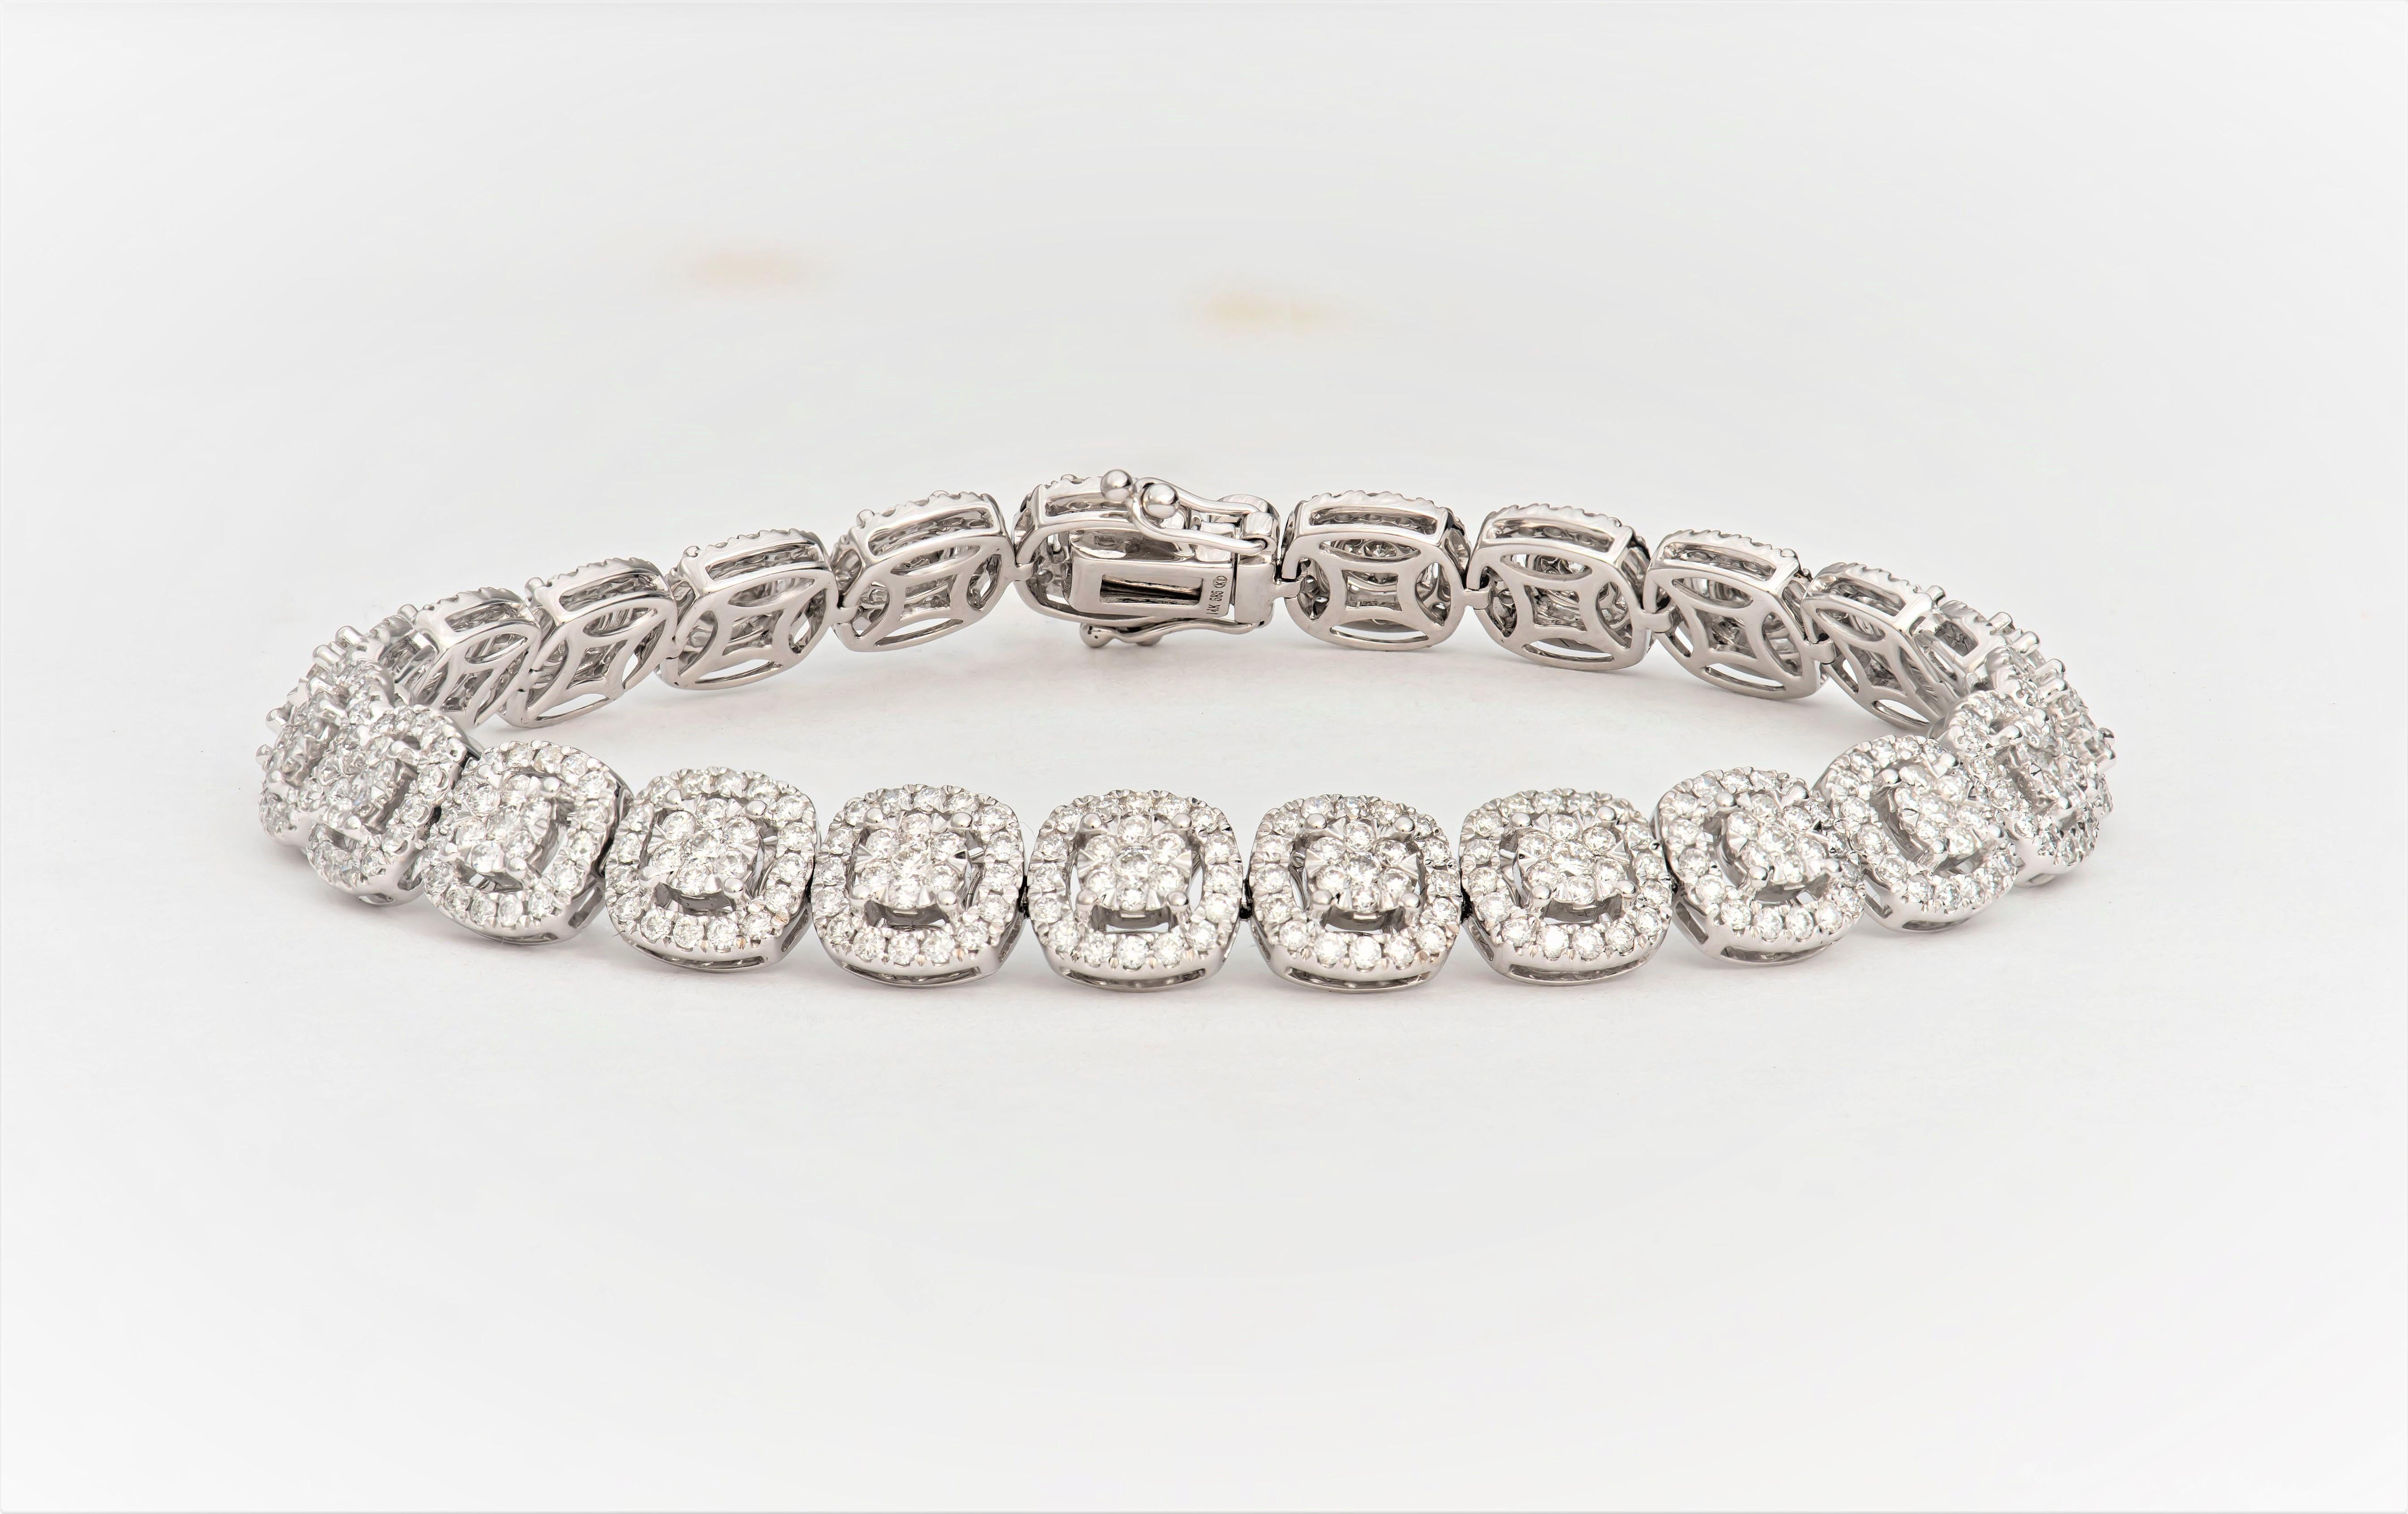 4.09 Carats total weight fine round brilliant cut diamonds set in cluster and cushion halo form, crafted at a length of 7 inches in 14K white gold. Beautiful combination of brilliance and elegance that makes a perfect addition for any night out.